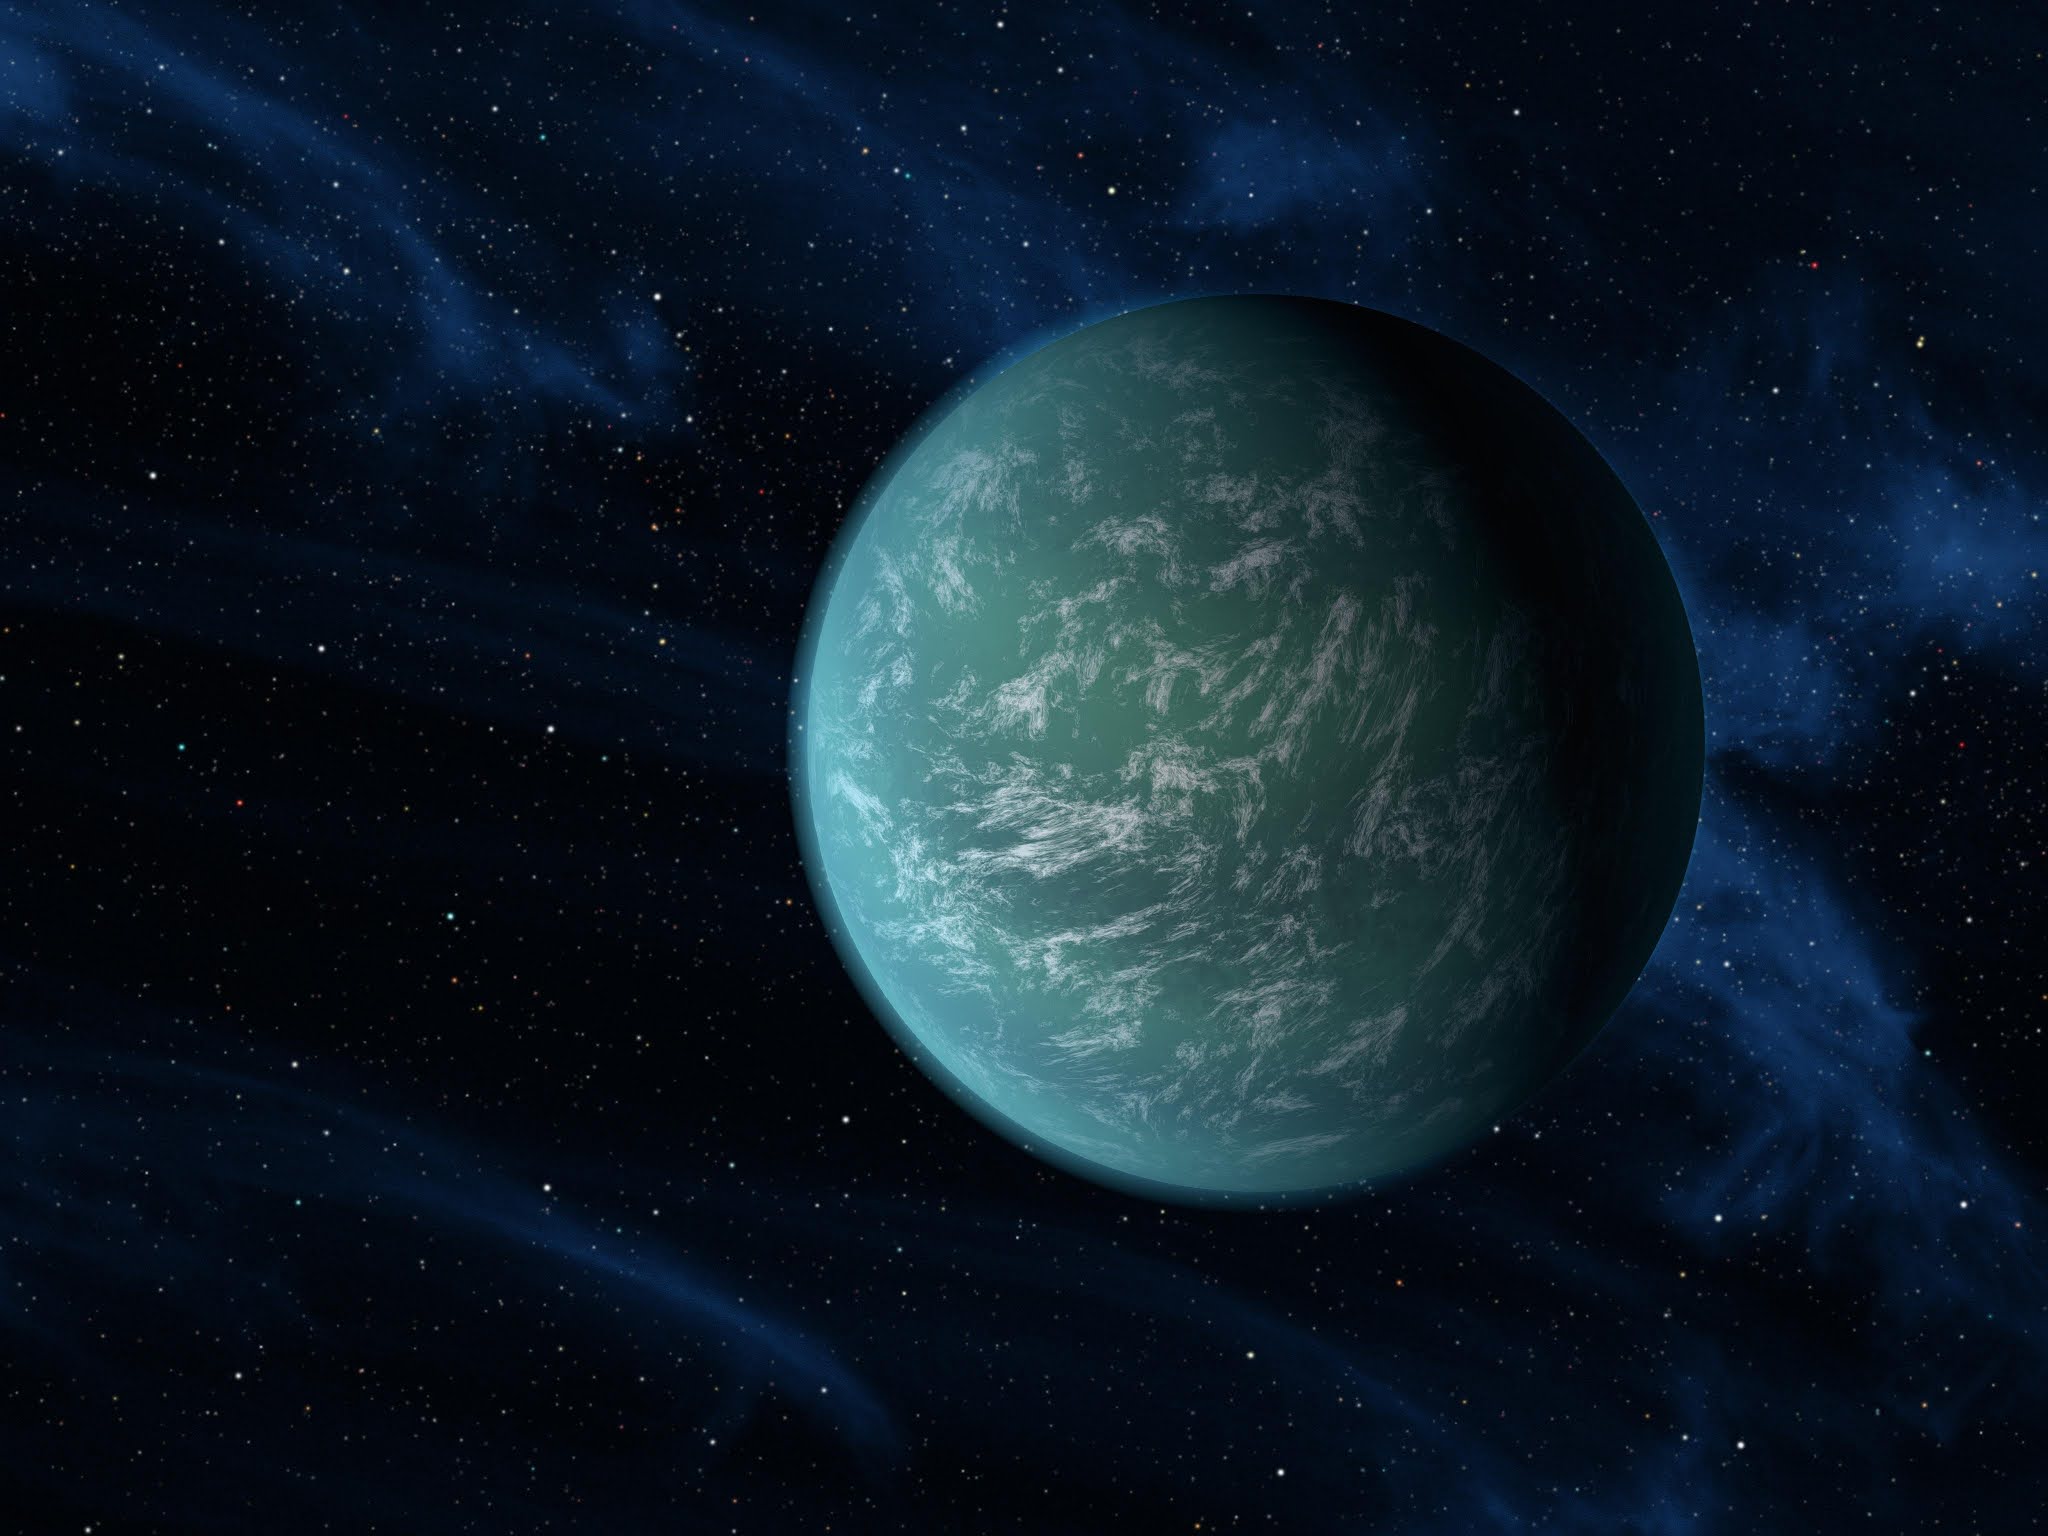 607694main Kepler22bArtwork full - 6 Planets Where Alien life Could Be Possible